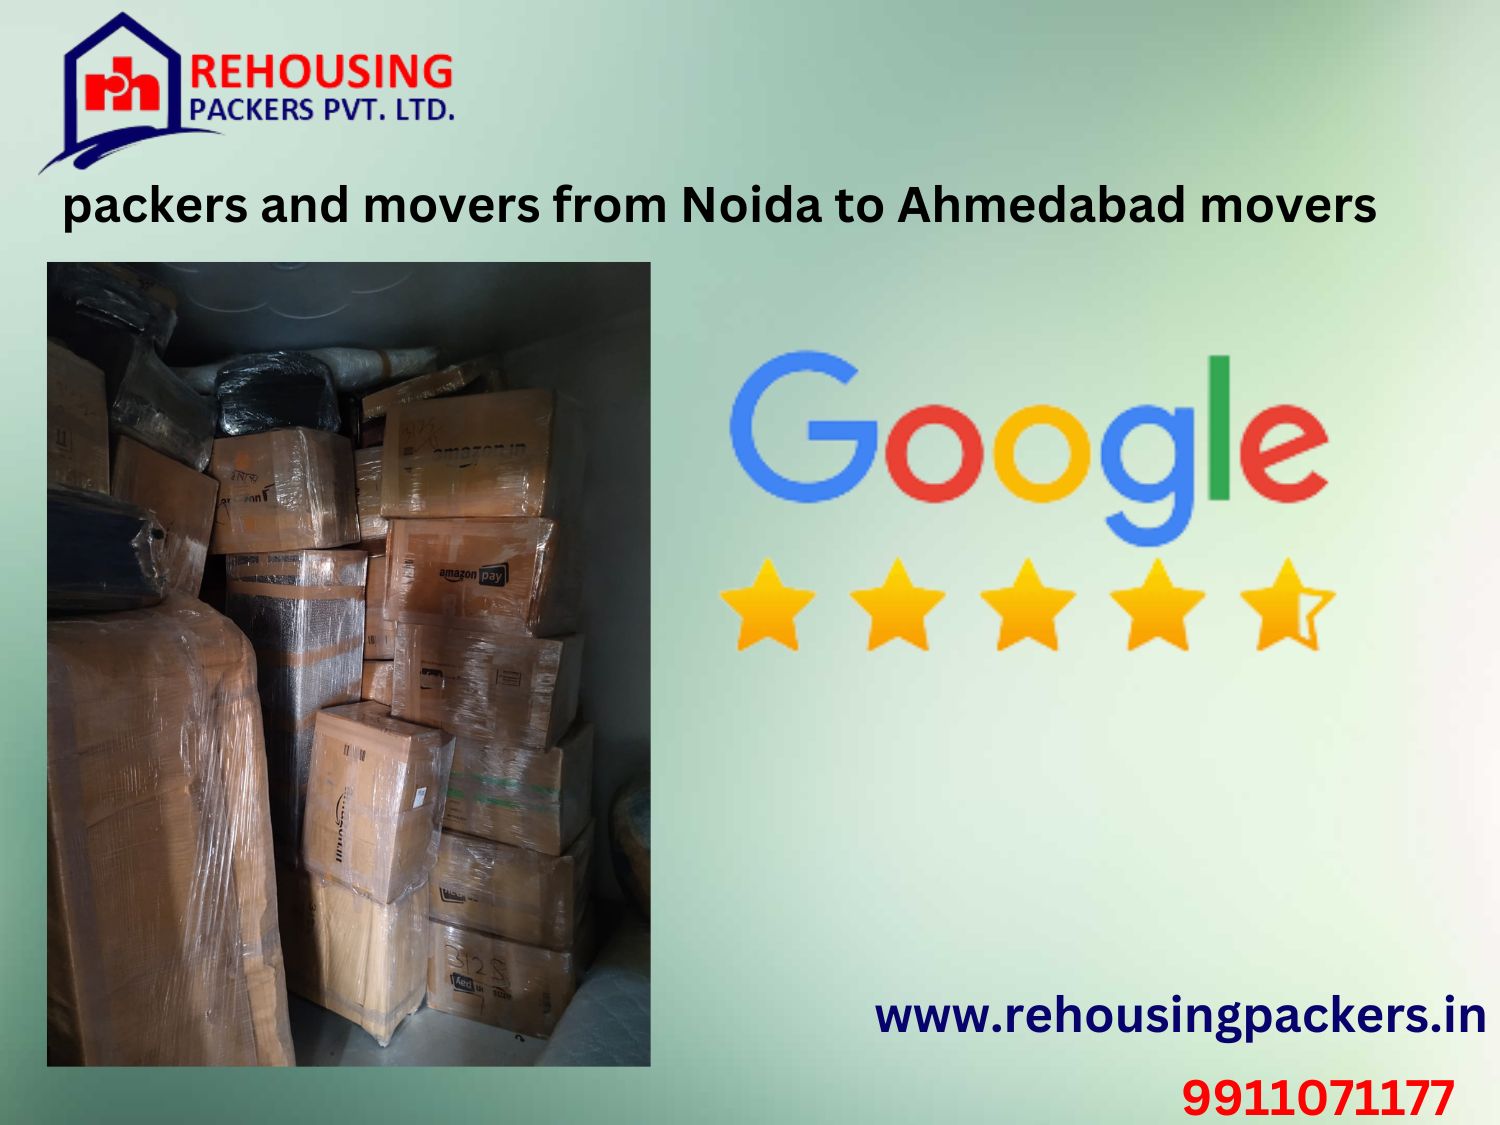 truck transport service from Noida to Ahmedabad